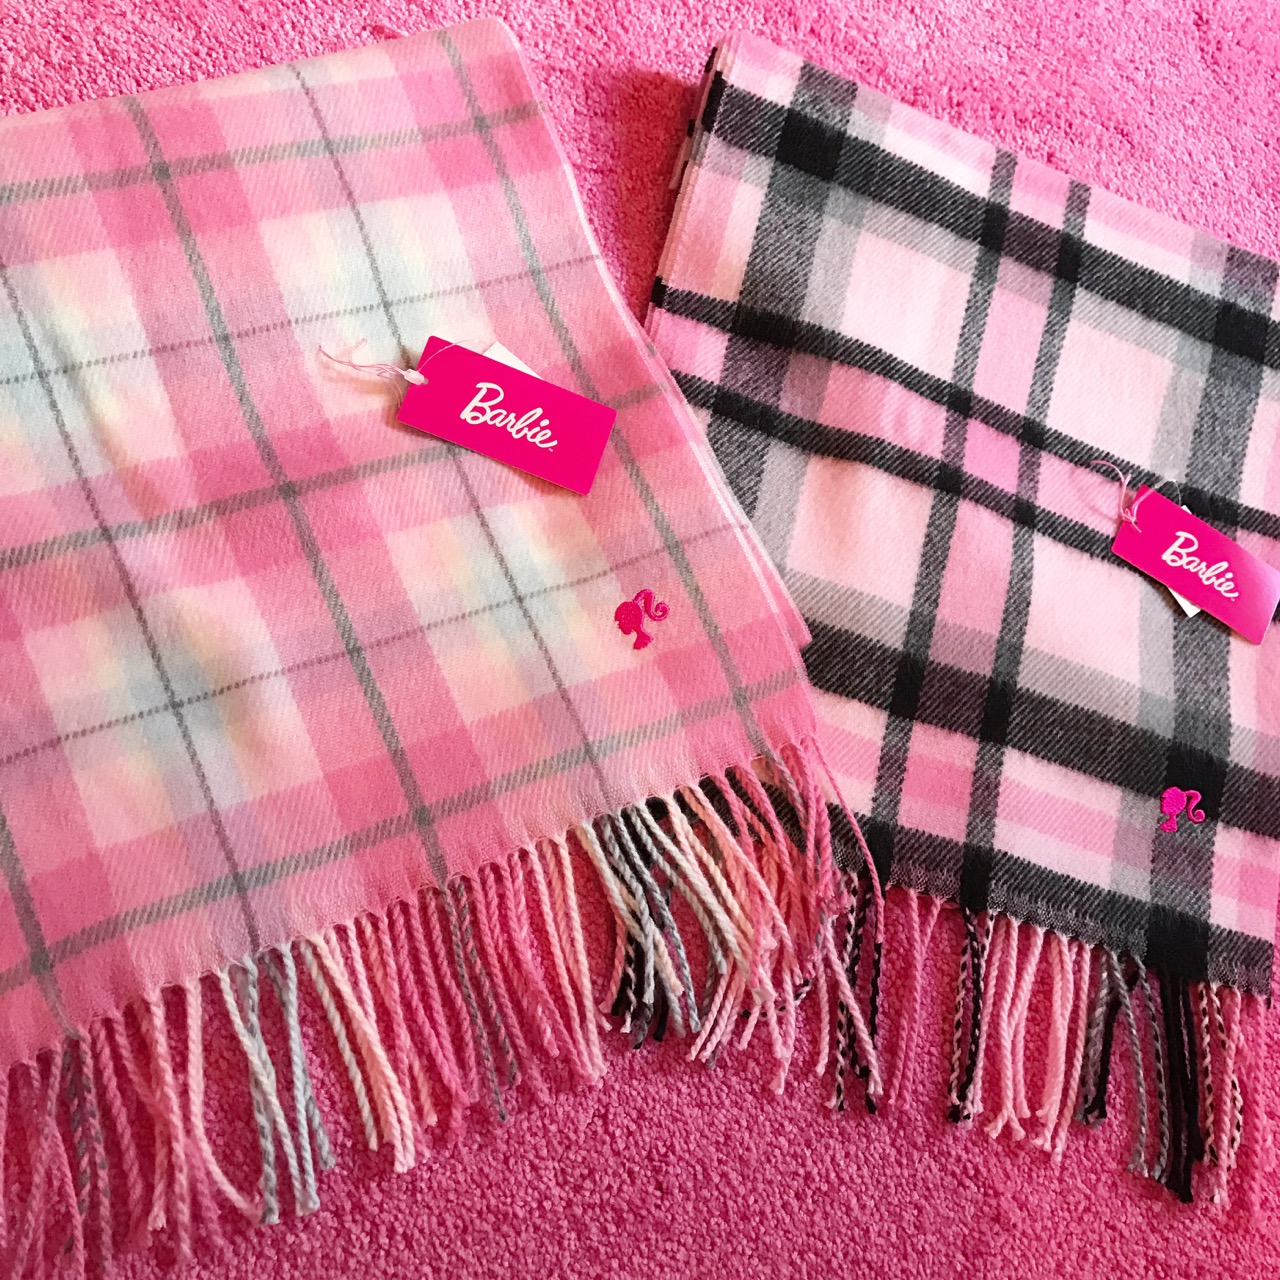 Azusa » Barbie Scarves from Japan♡